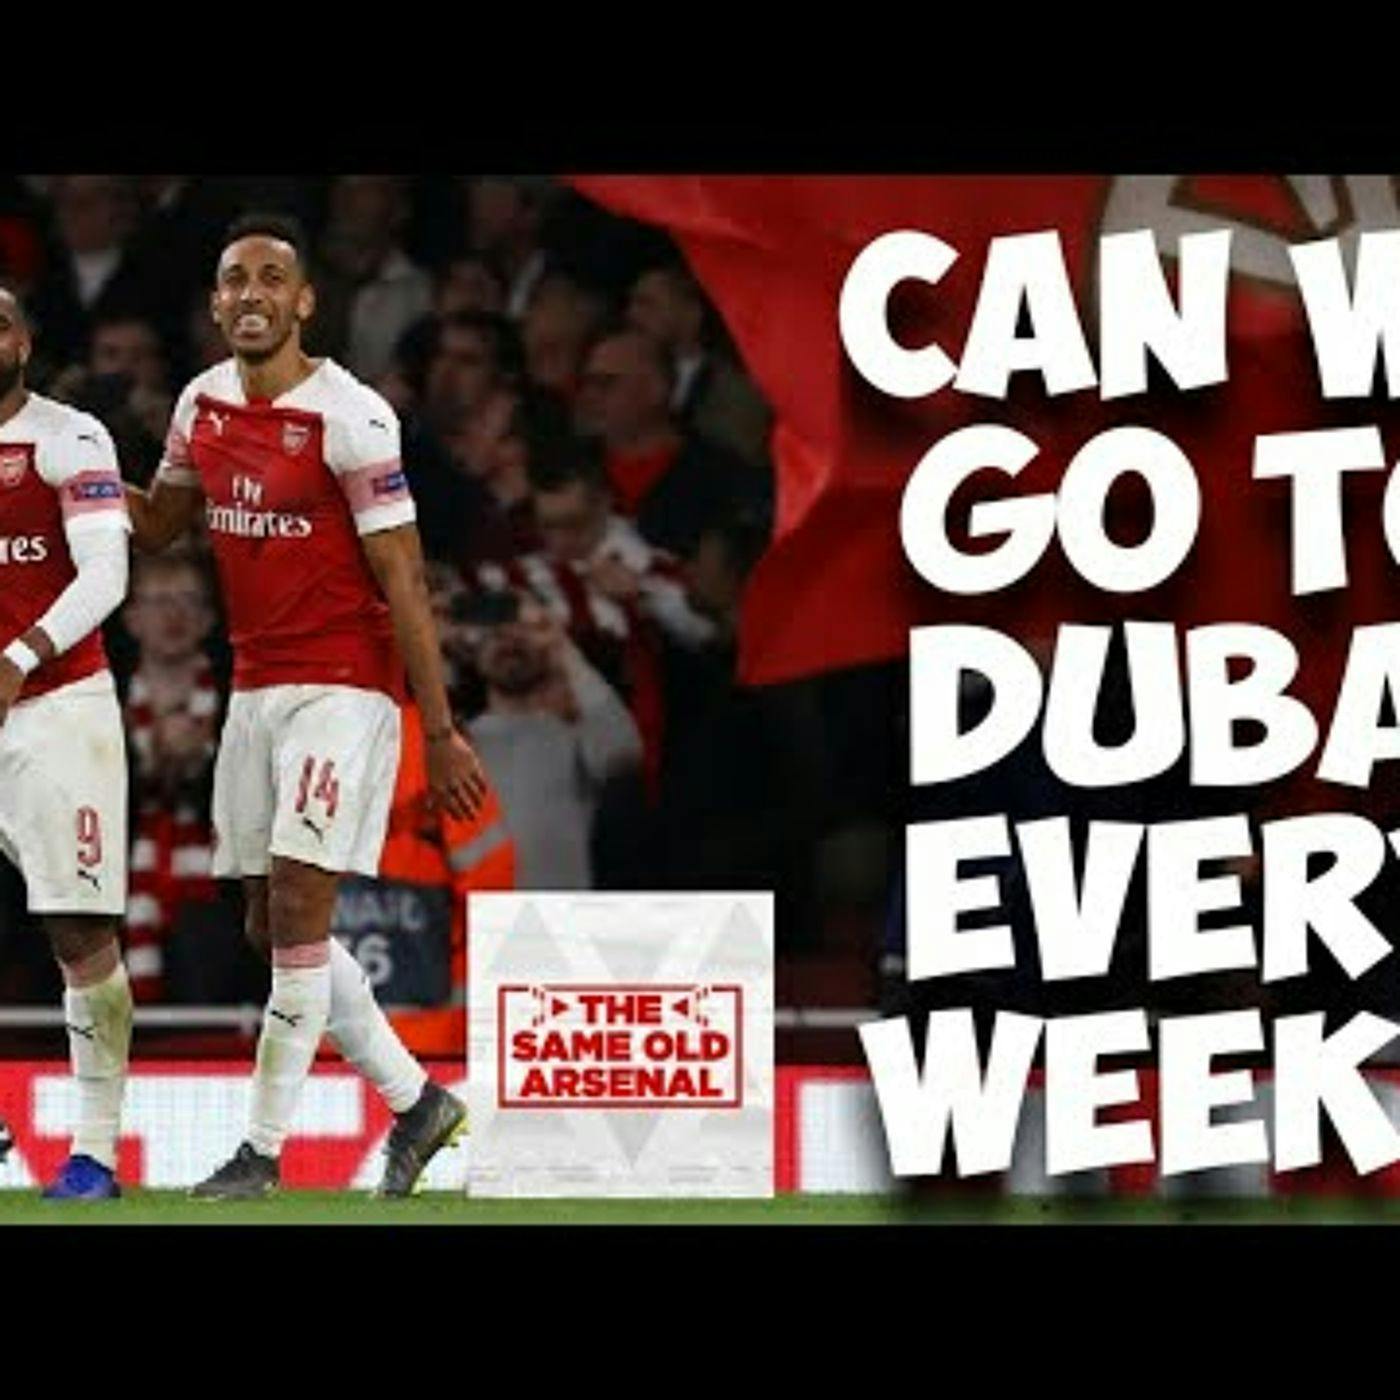 Episode 104 | Arsenal 4-0 Newcastle | Can we go to Dubai every week |